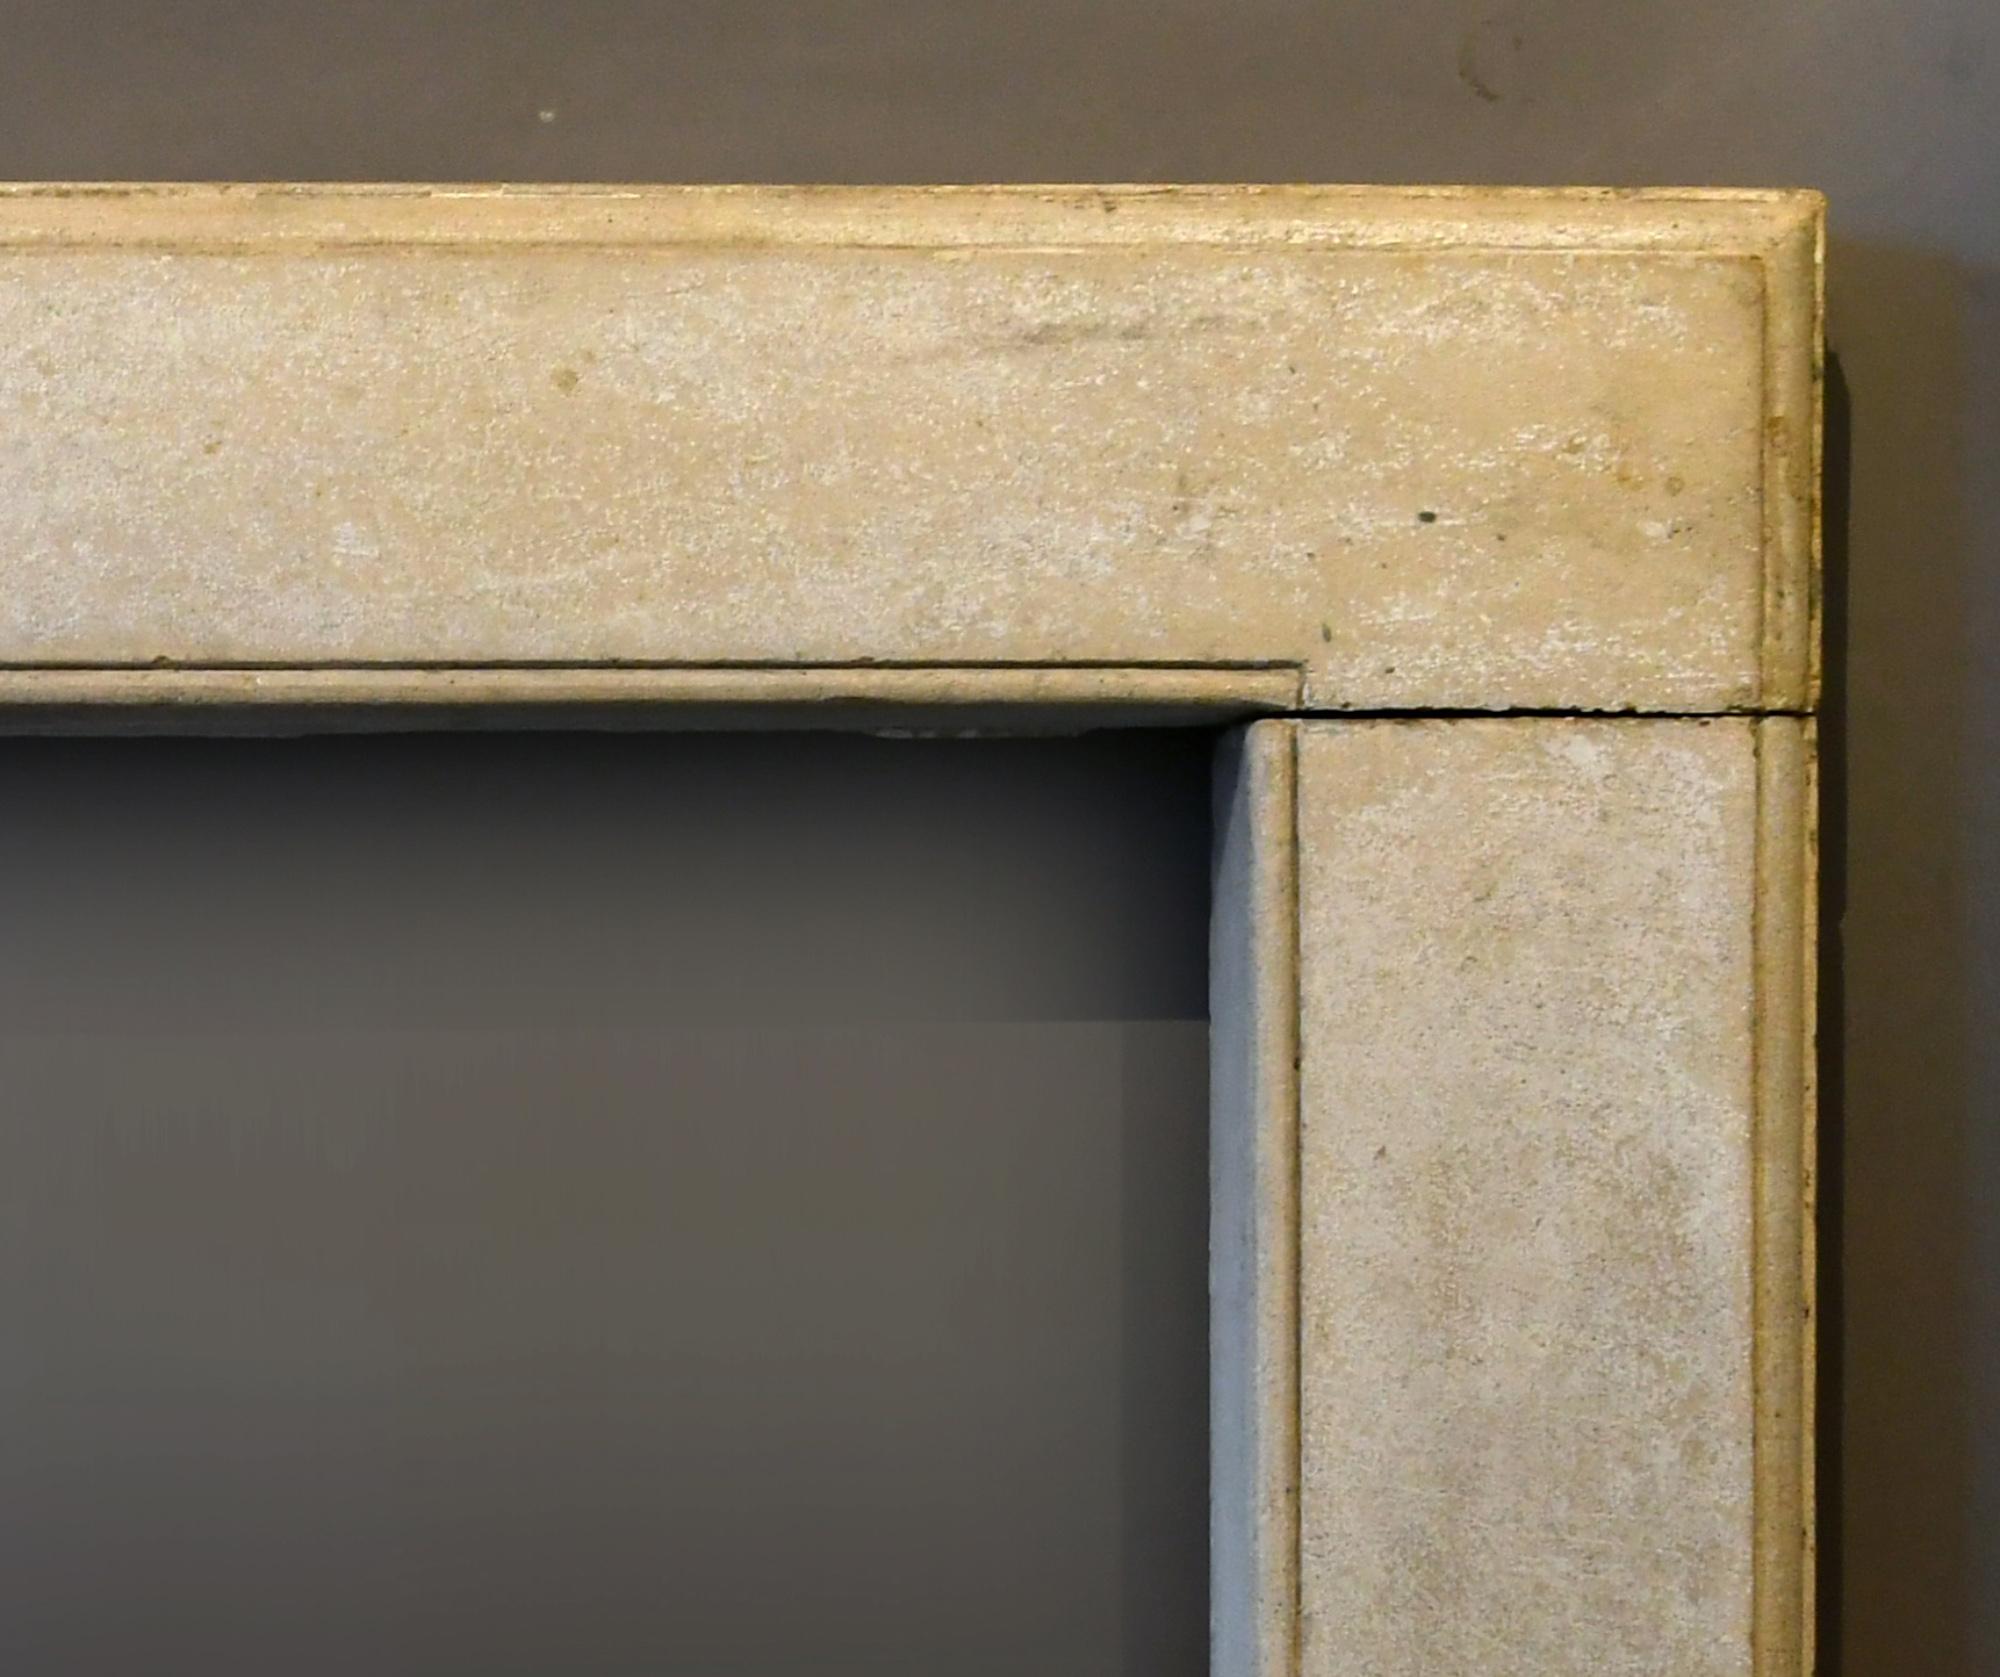 You can see an small chimney piece made in England. It is made out of an cotswolds sandstone, circa 1760.
Through the simplicity the chimney gains an very special charisma.
Fireplace and Mantels
Interior W 85cm inside dimension
Interior H 81 cm